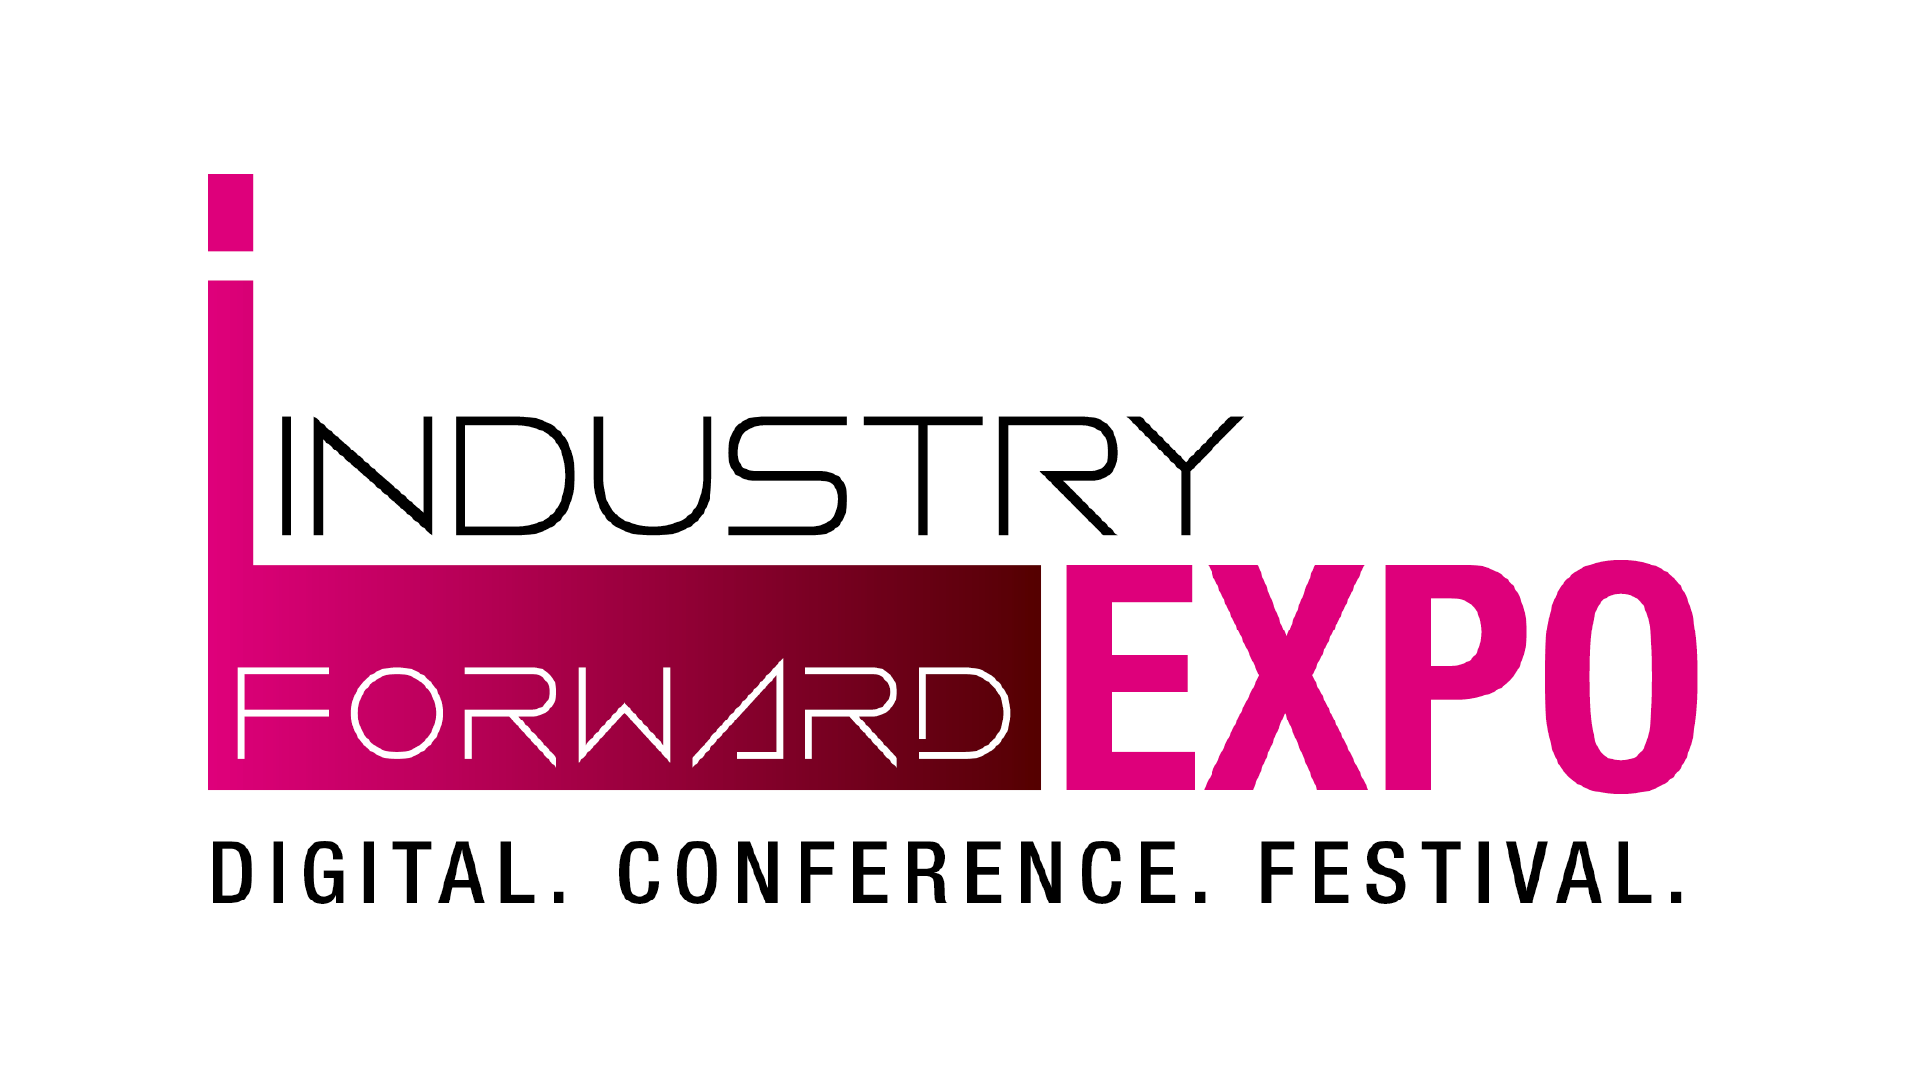 INDUSTRY.forward Expo logo in violet, white and black. Under the logo is writen "Digital. Conference. Festival."